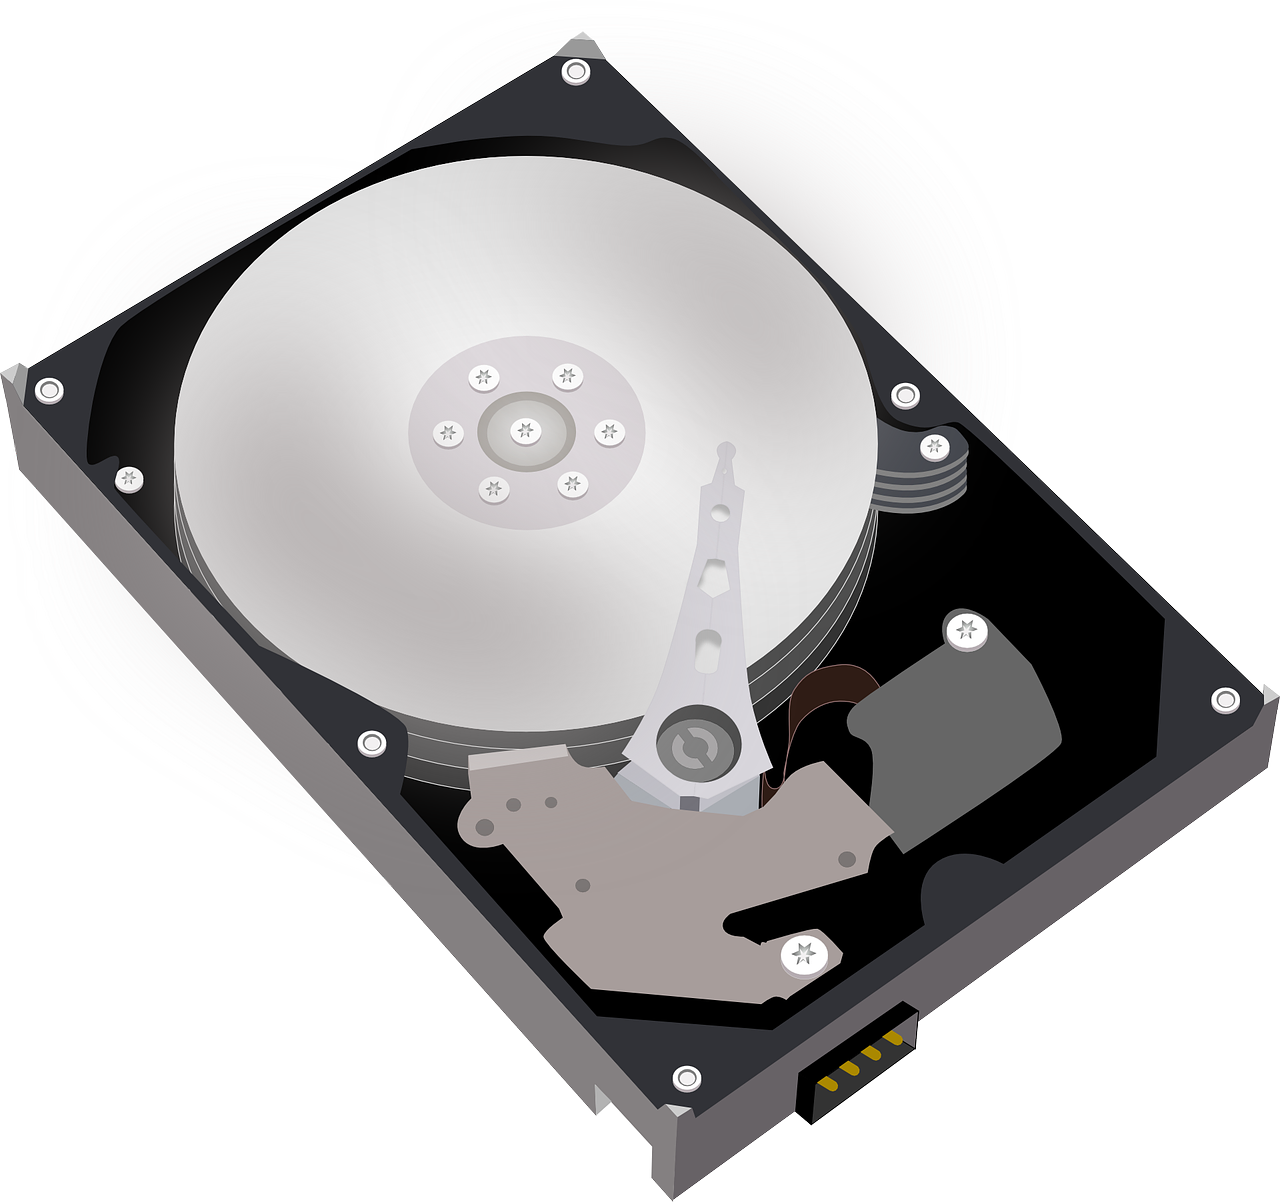 How to Recover Data from a Hard Drive on a Mac